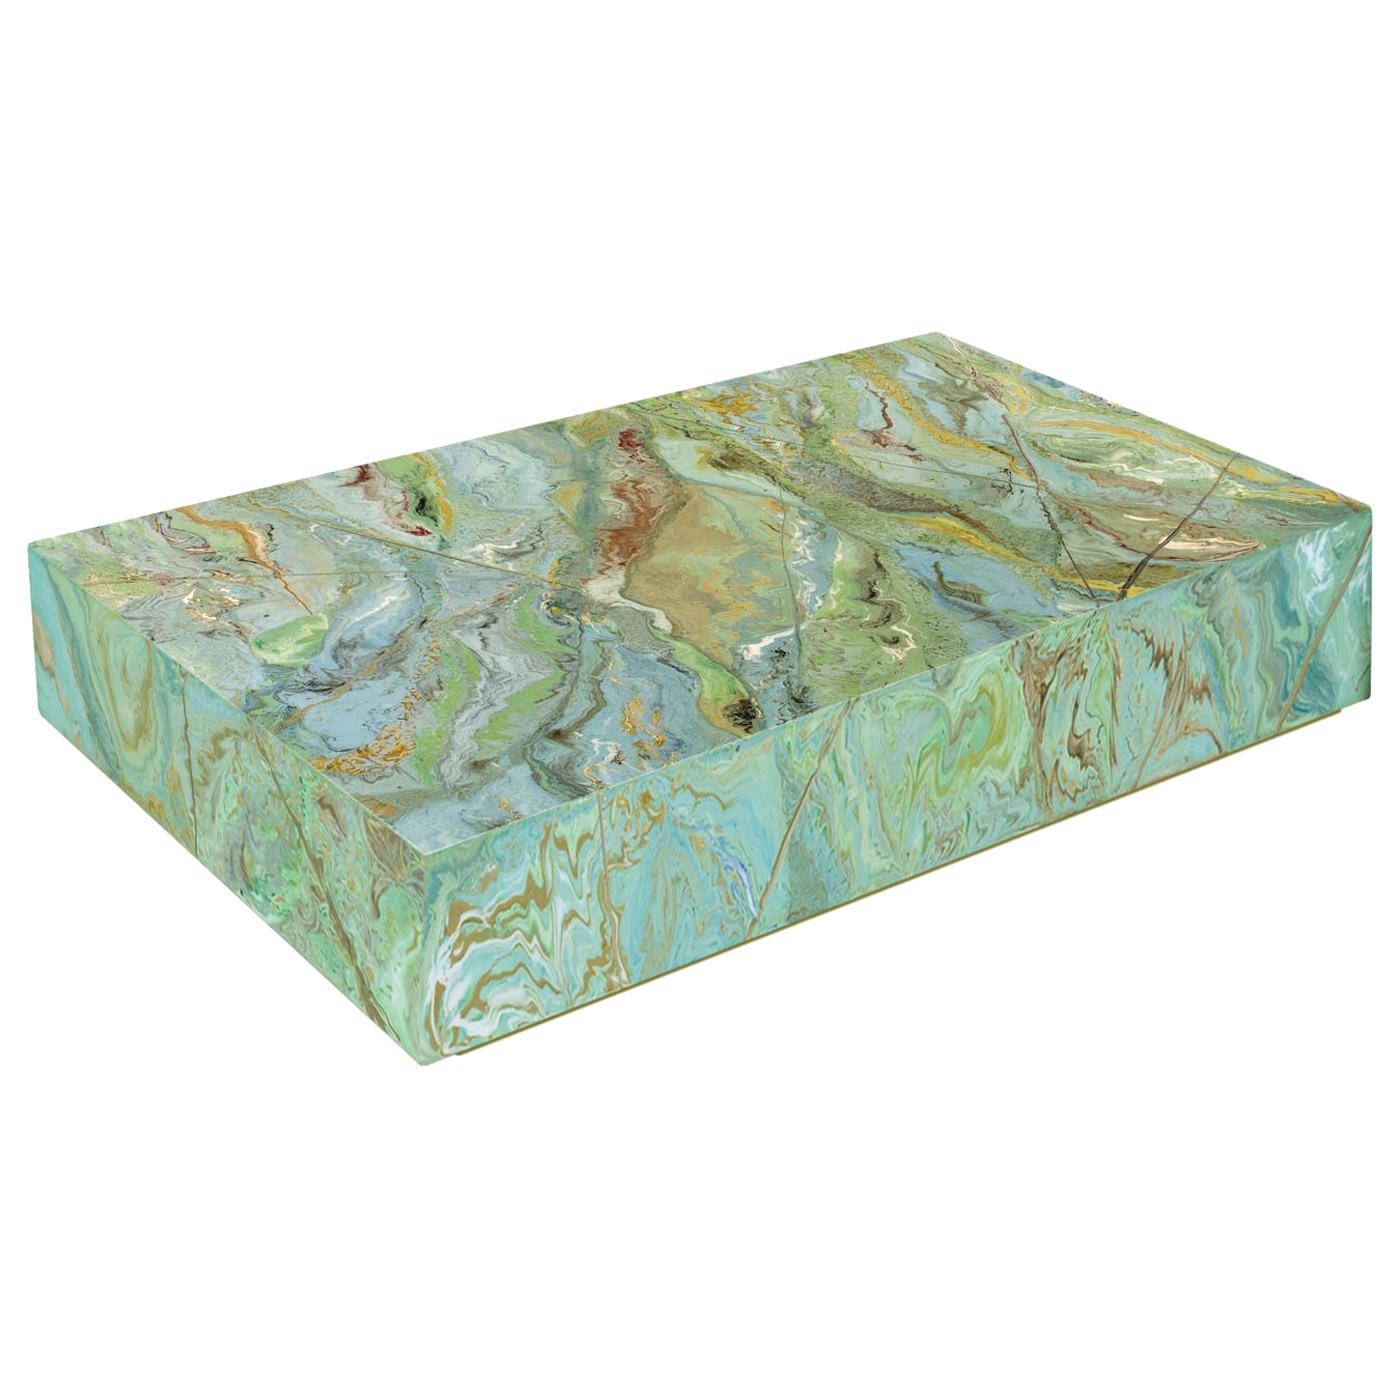 Modern Green Coffee Table Marbled Scagliola Art Decor Handmade in Italy